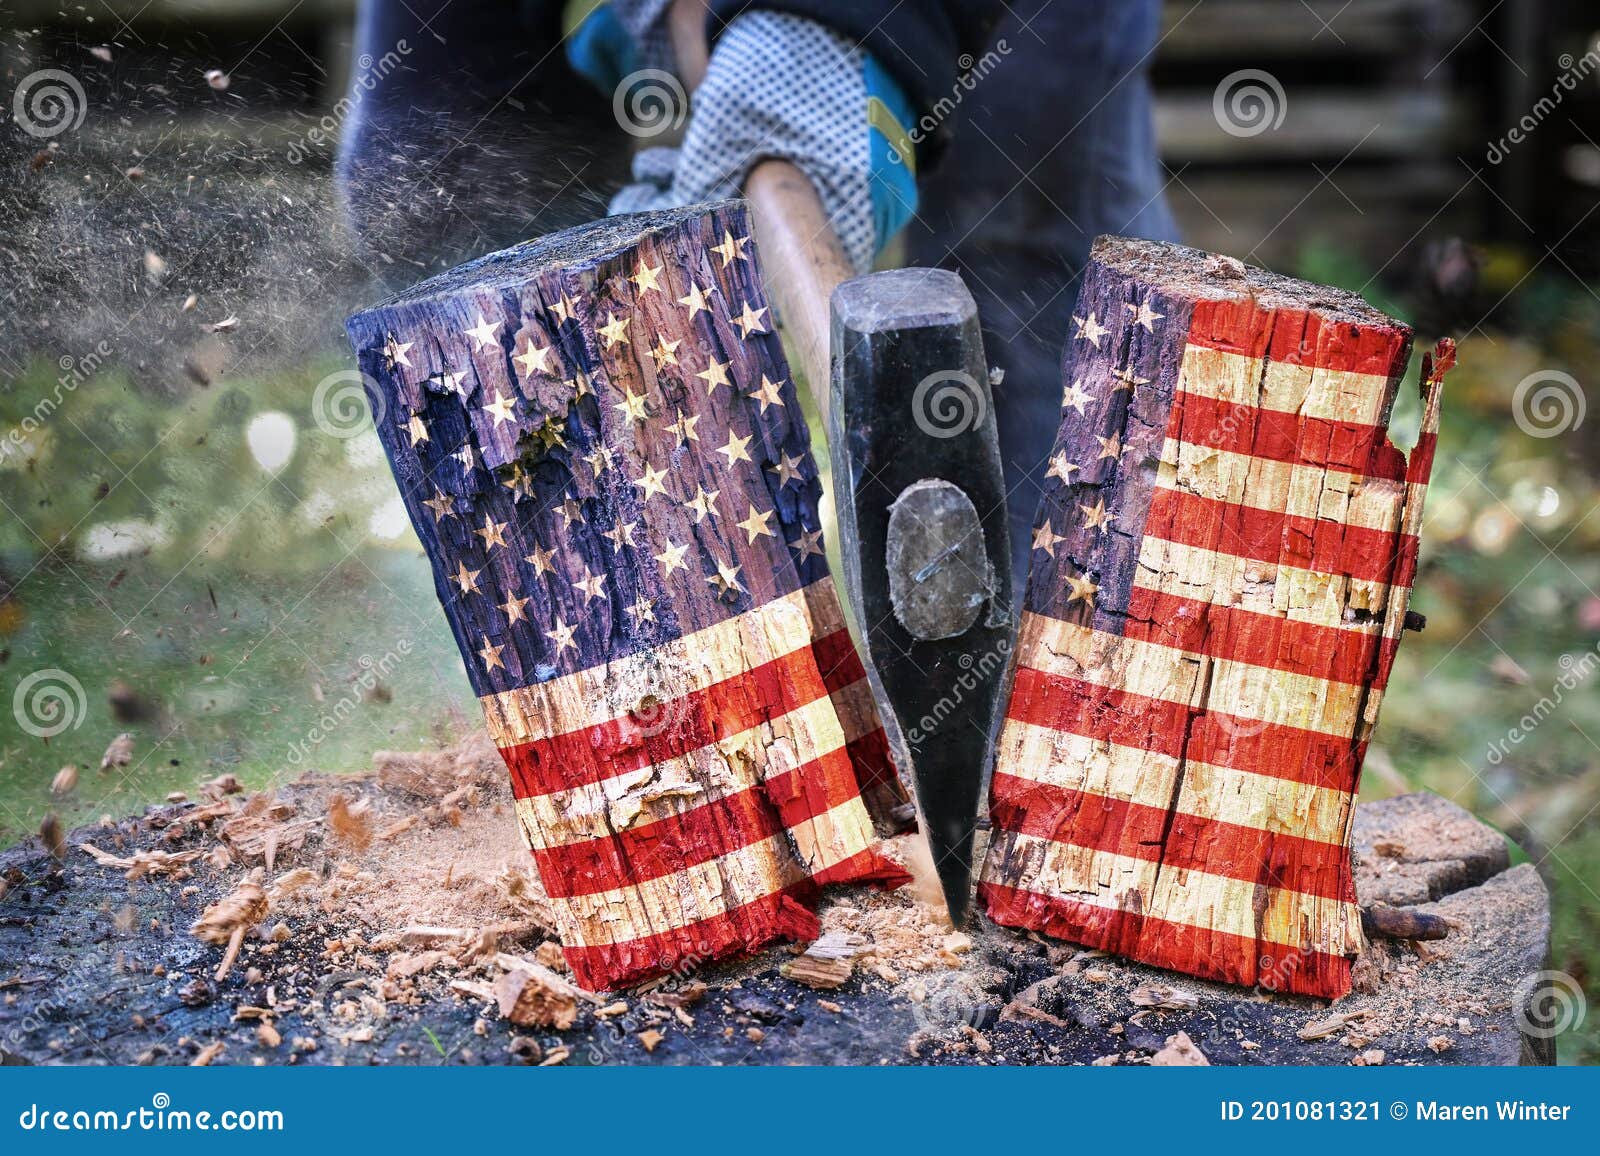 wooden block with american flag is split in two halves with an axe, metaphor for the divided country after the election